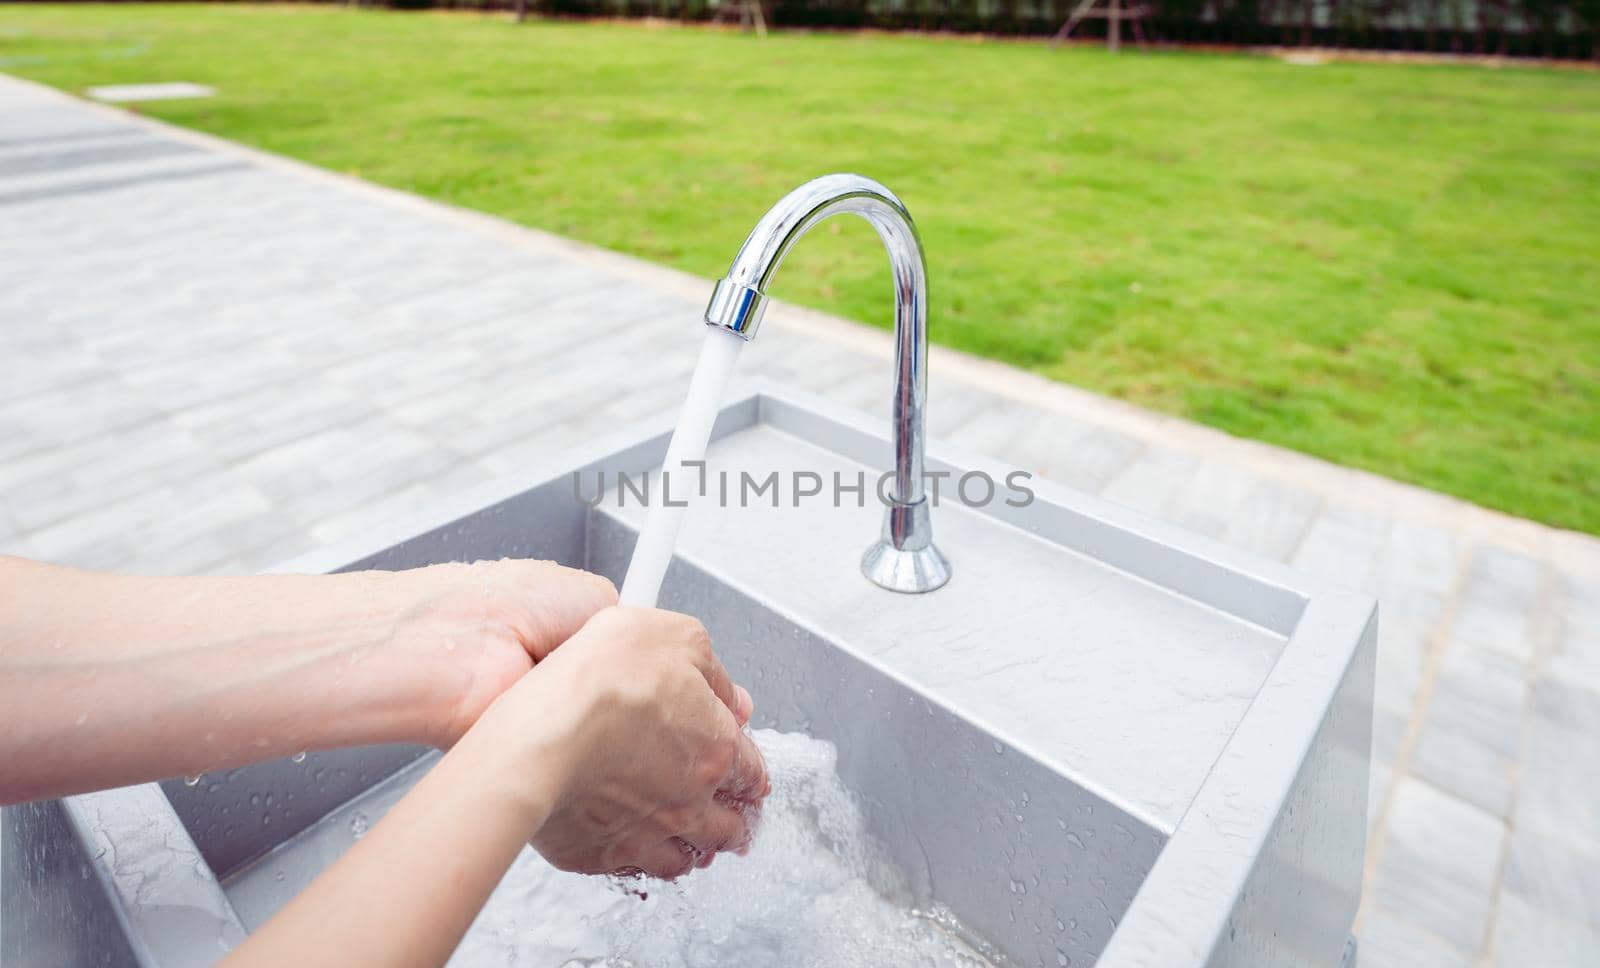 Woman washing hands with tap water under faucet at white sink. Washing hands with tap water at outdoor sink near grass field. Personal hygiene to prevent coronavirus or covid 19. Healthy lifestyle.